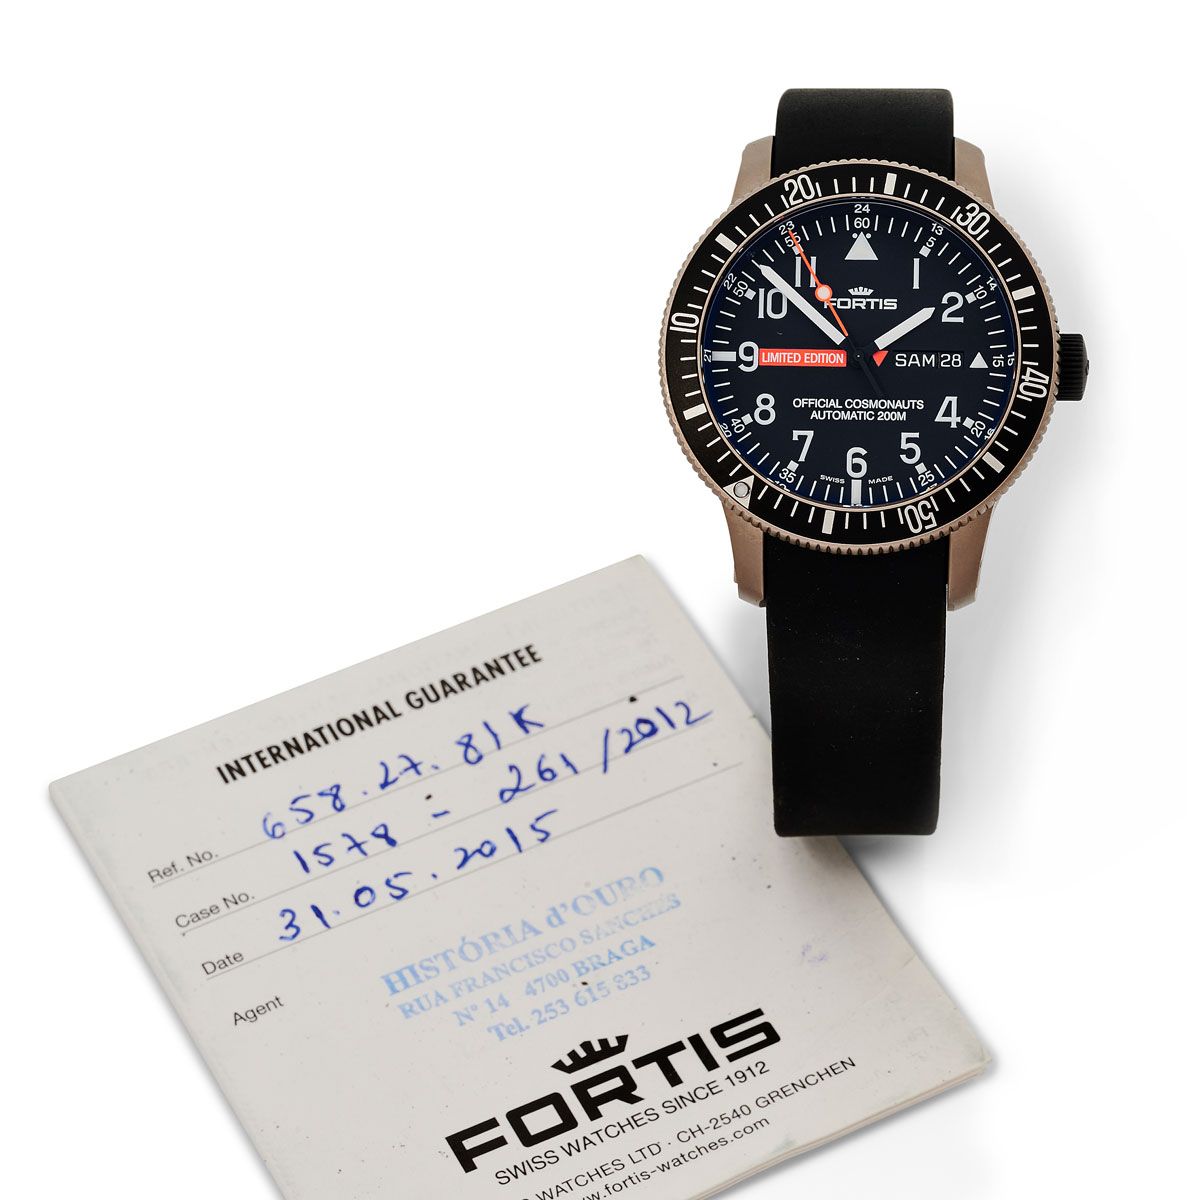 Null Fortis, Cosmonaut, limited edition no. 261/2012, sold on May 31, 2015.

A l&hellip;